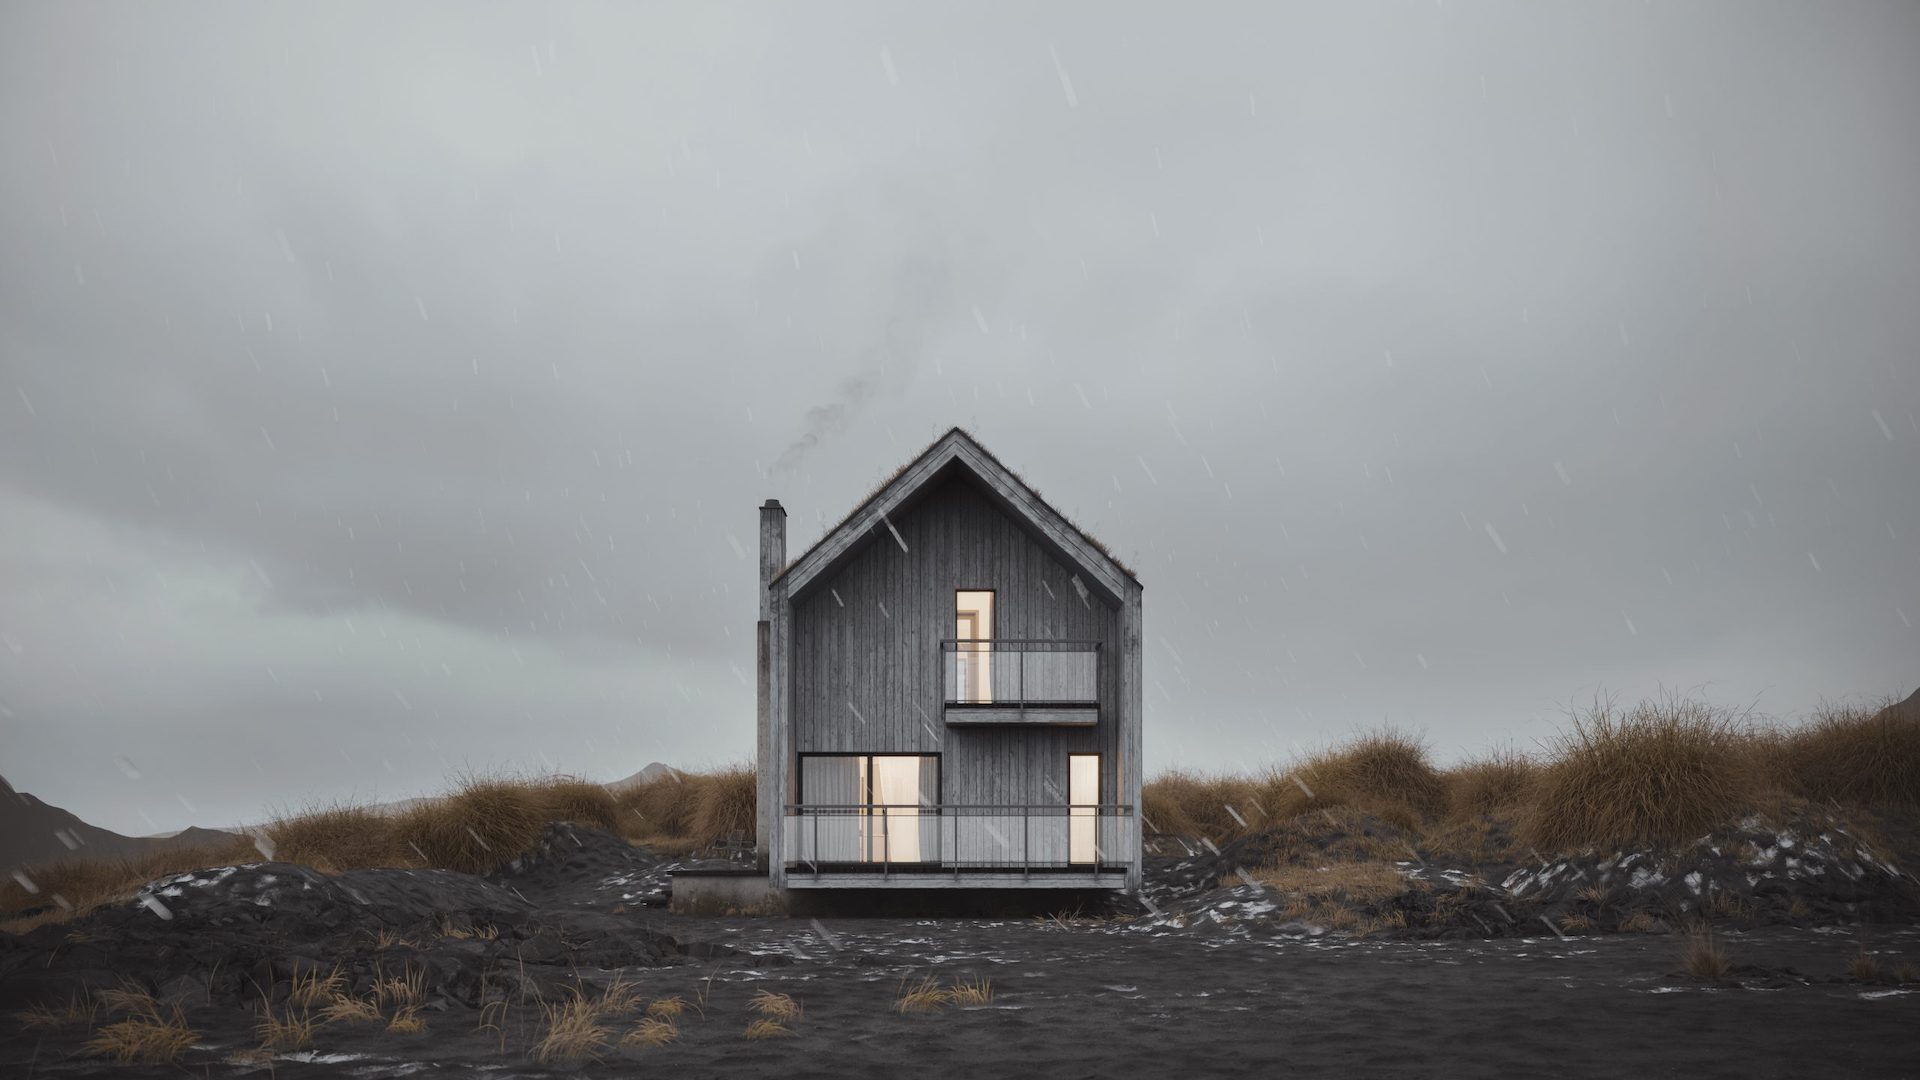 High-Quality 3D Visualization of a House in a Rainy Setting